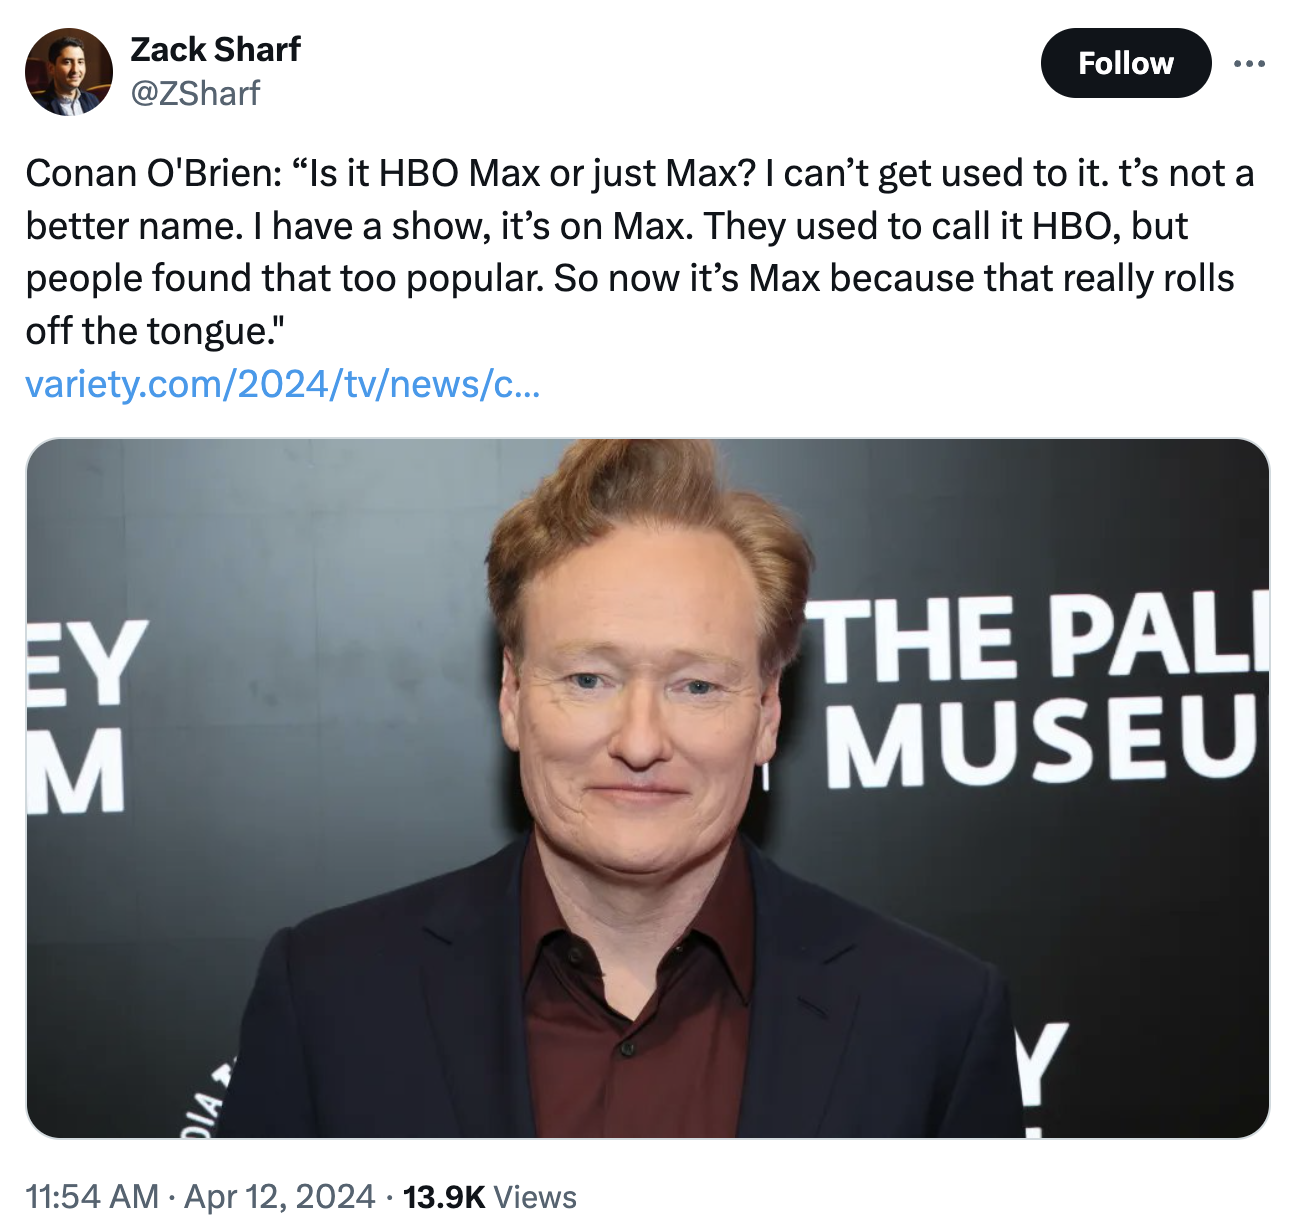 gentleman - Zack Sharf Conan O'Brien "Is it Hbo Max or just Max? I can't get used to it. t's not a better name. I have a show, it's on Max. They used to call it Hbo, but people found that too popular. So now it's Max because that really rolls off the tong